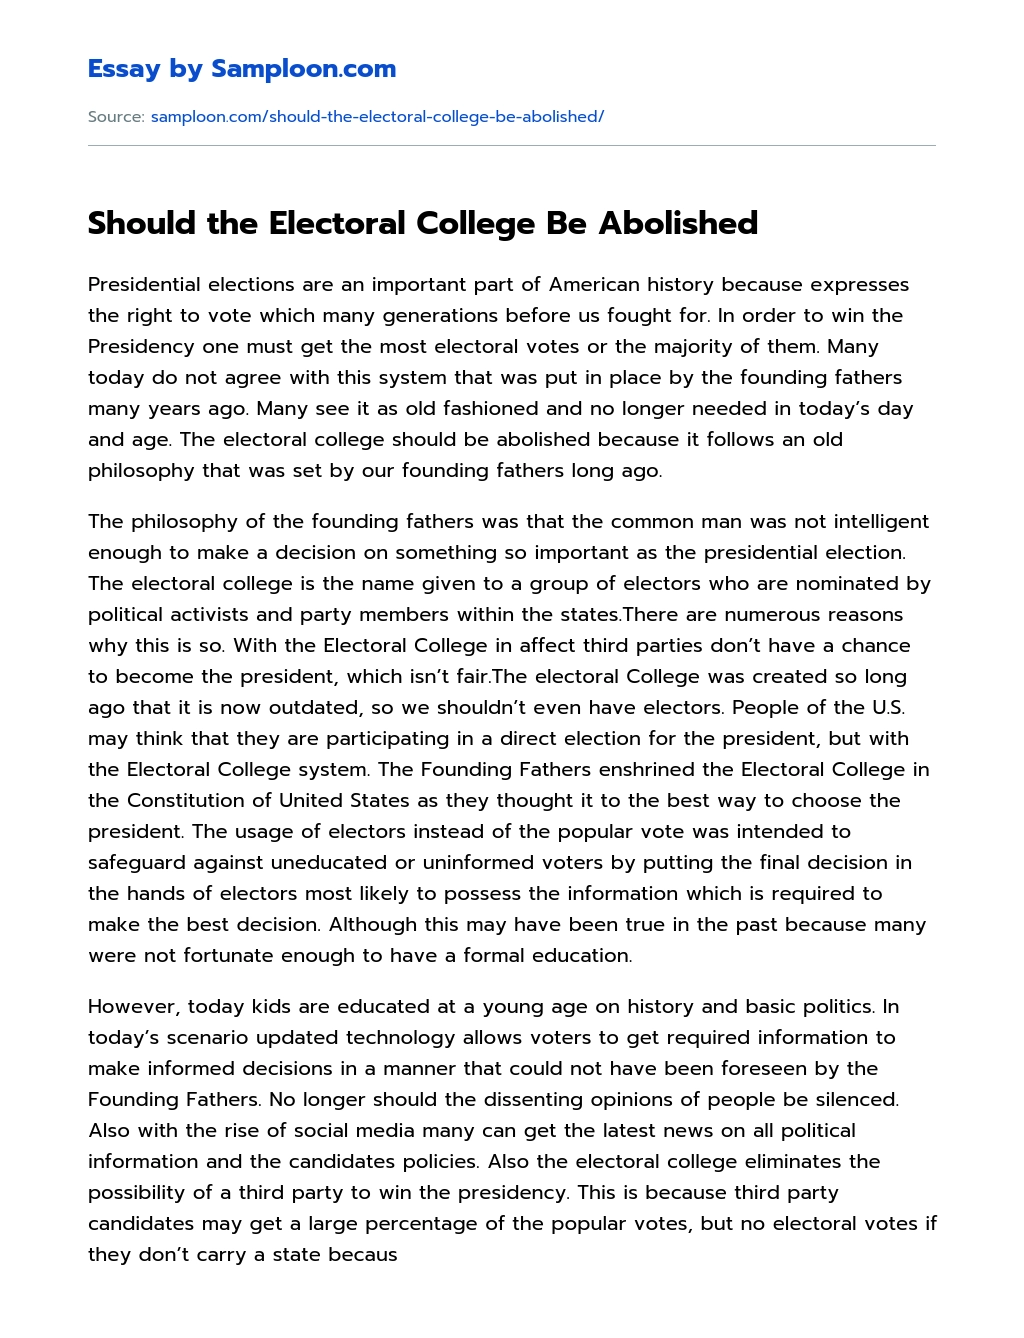 Should the Electoral College Be Abolished essay